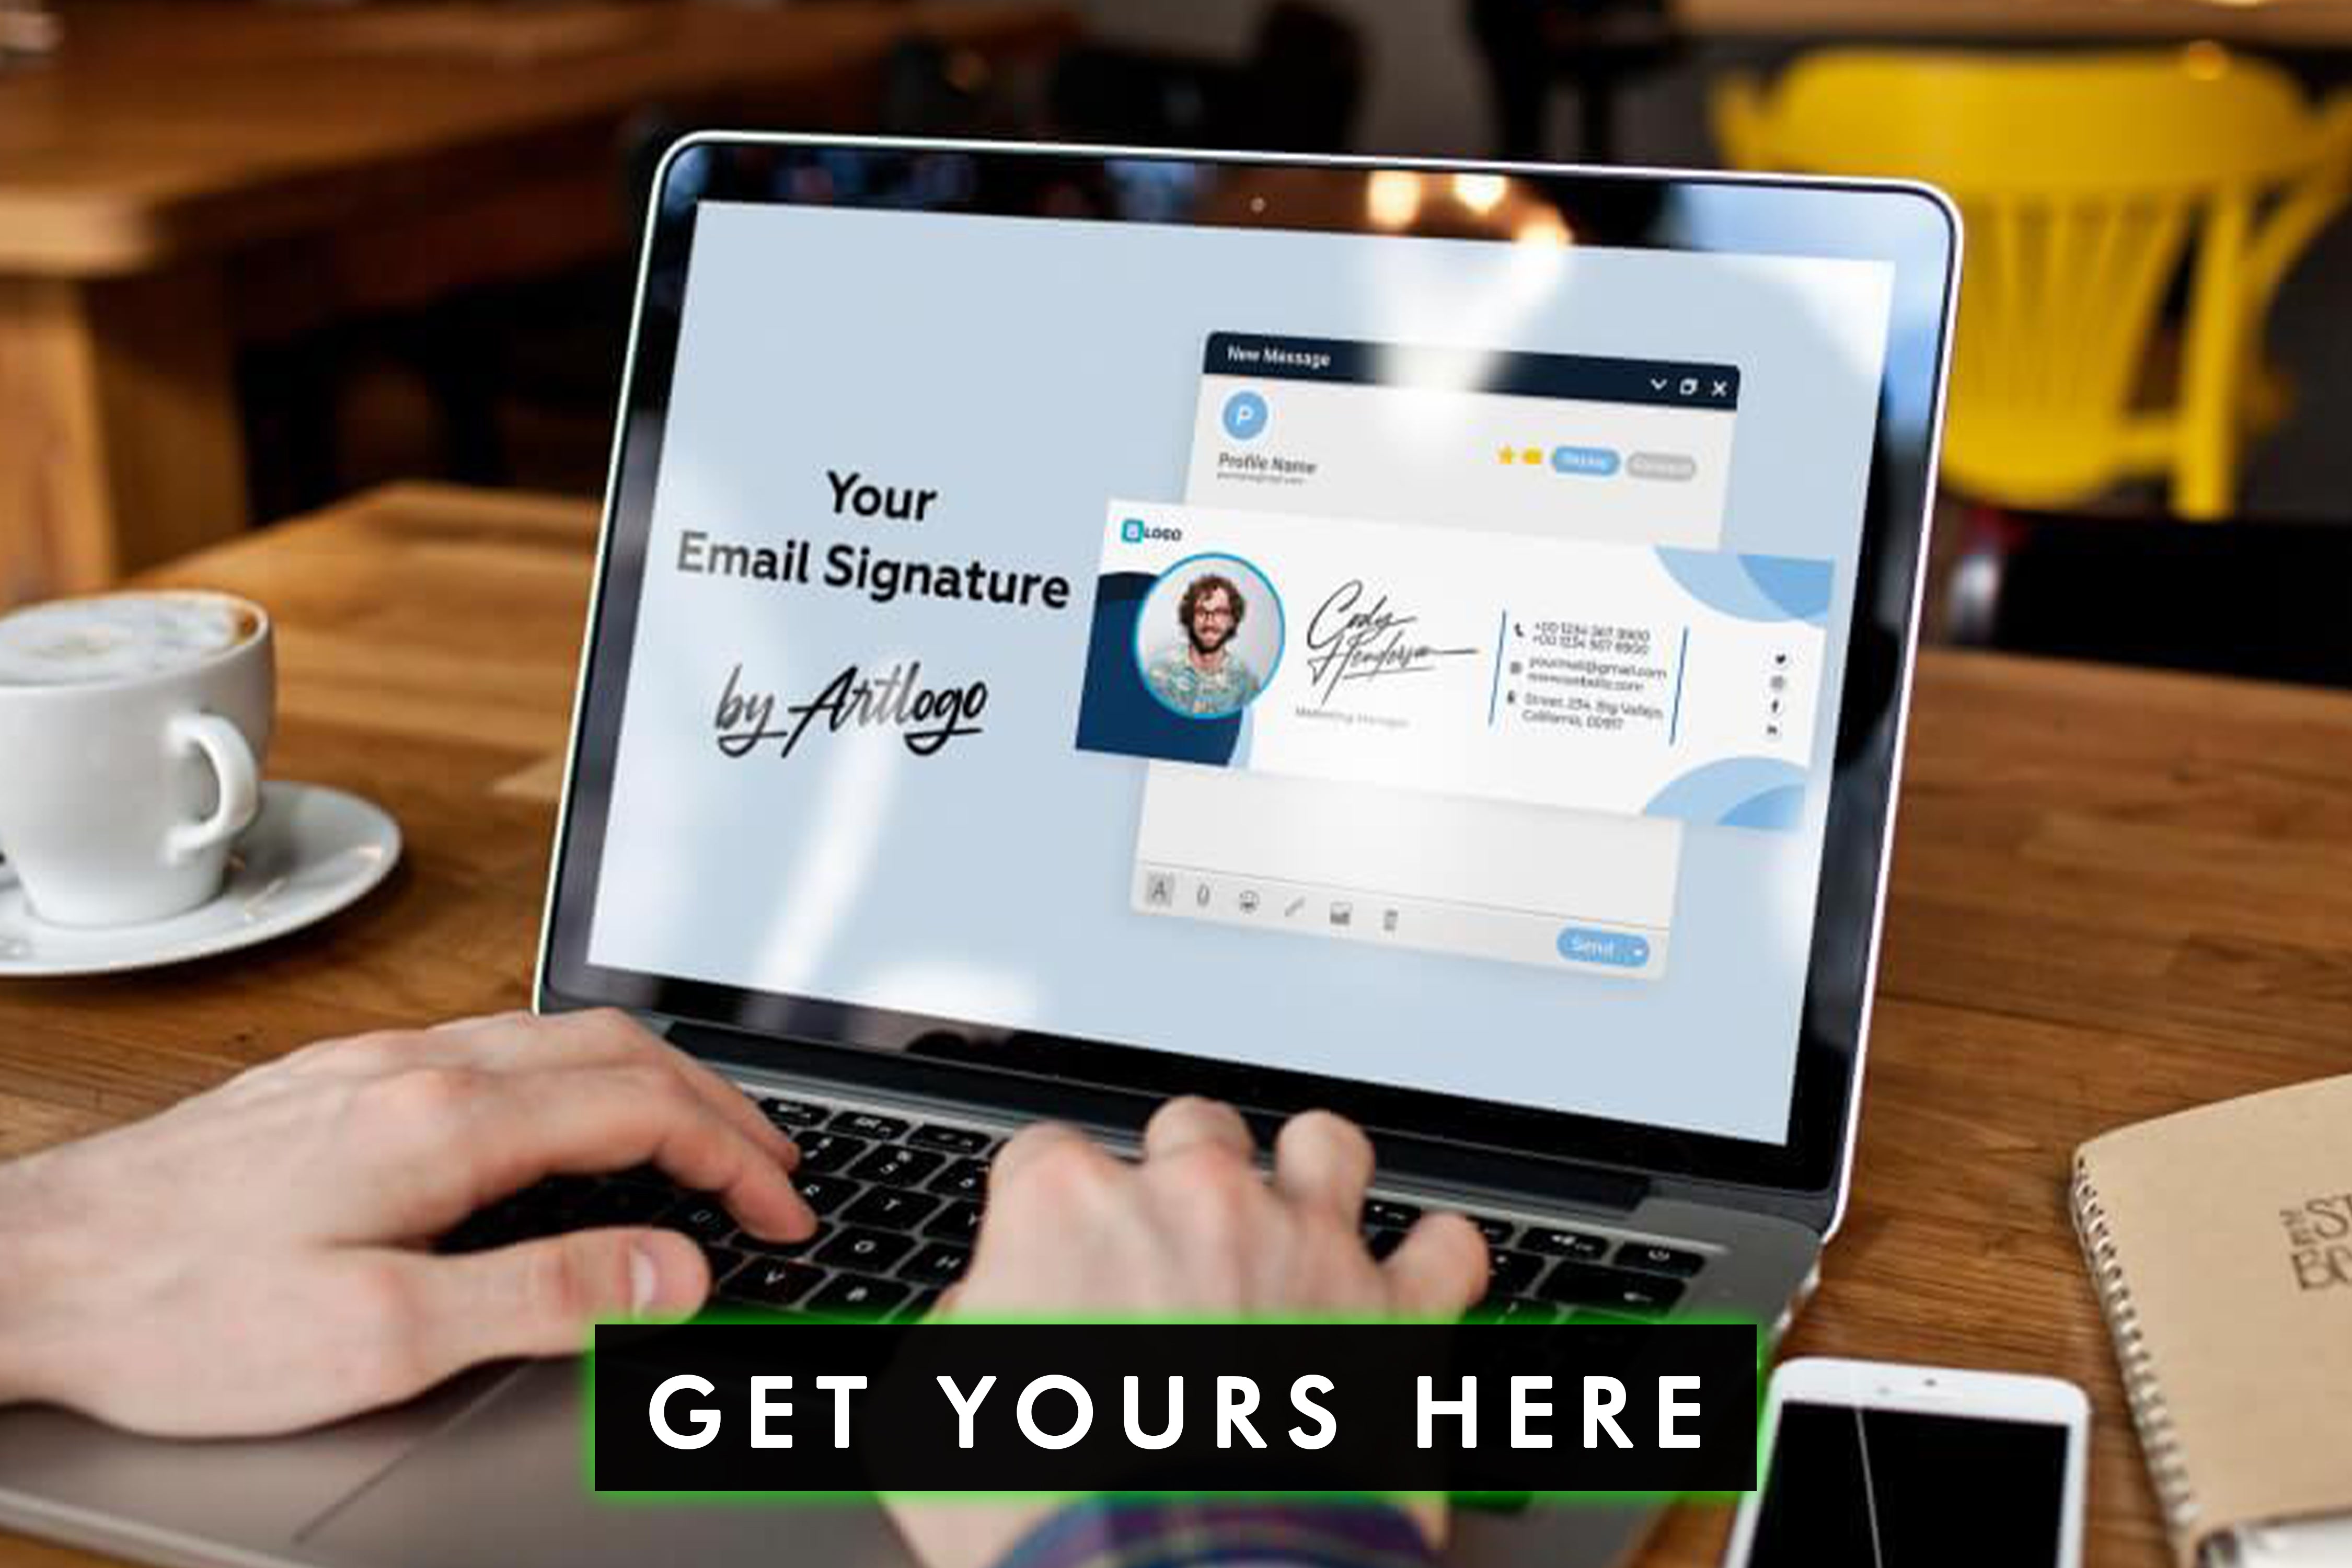 Make your emails stand out with a HTML signature. Follow our step-by-step guide to add an HTML signature to Outlook and impress your recipients.